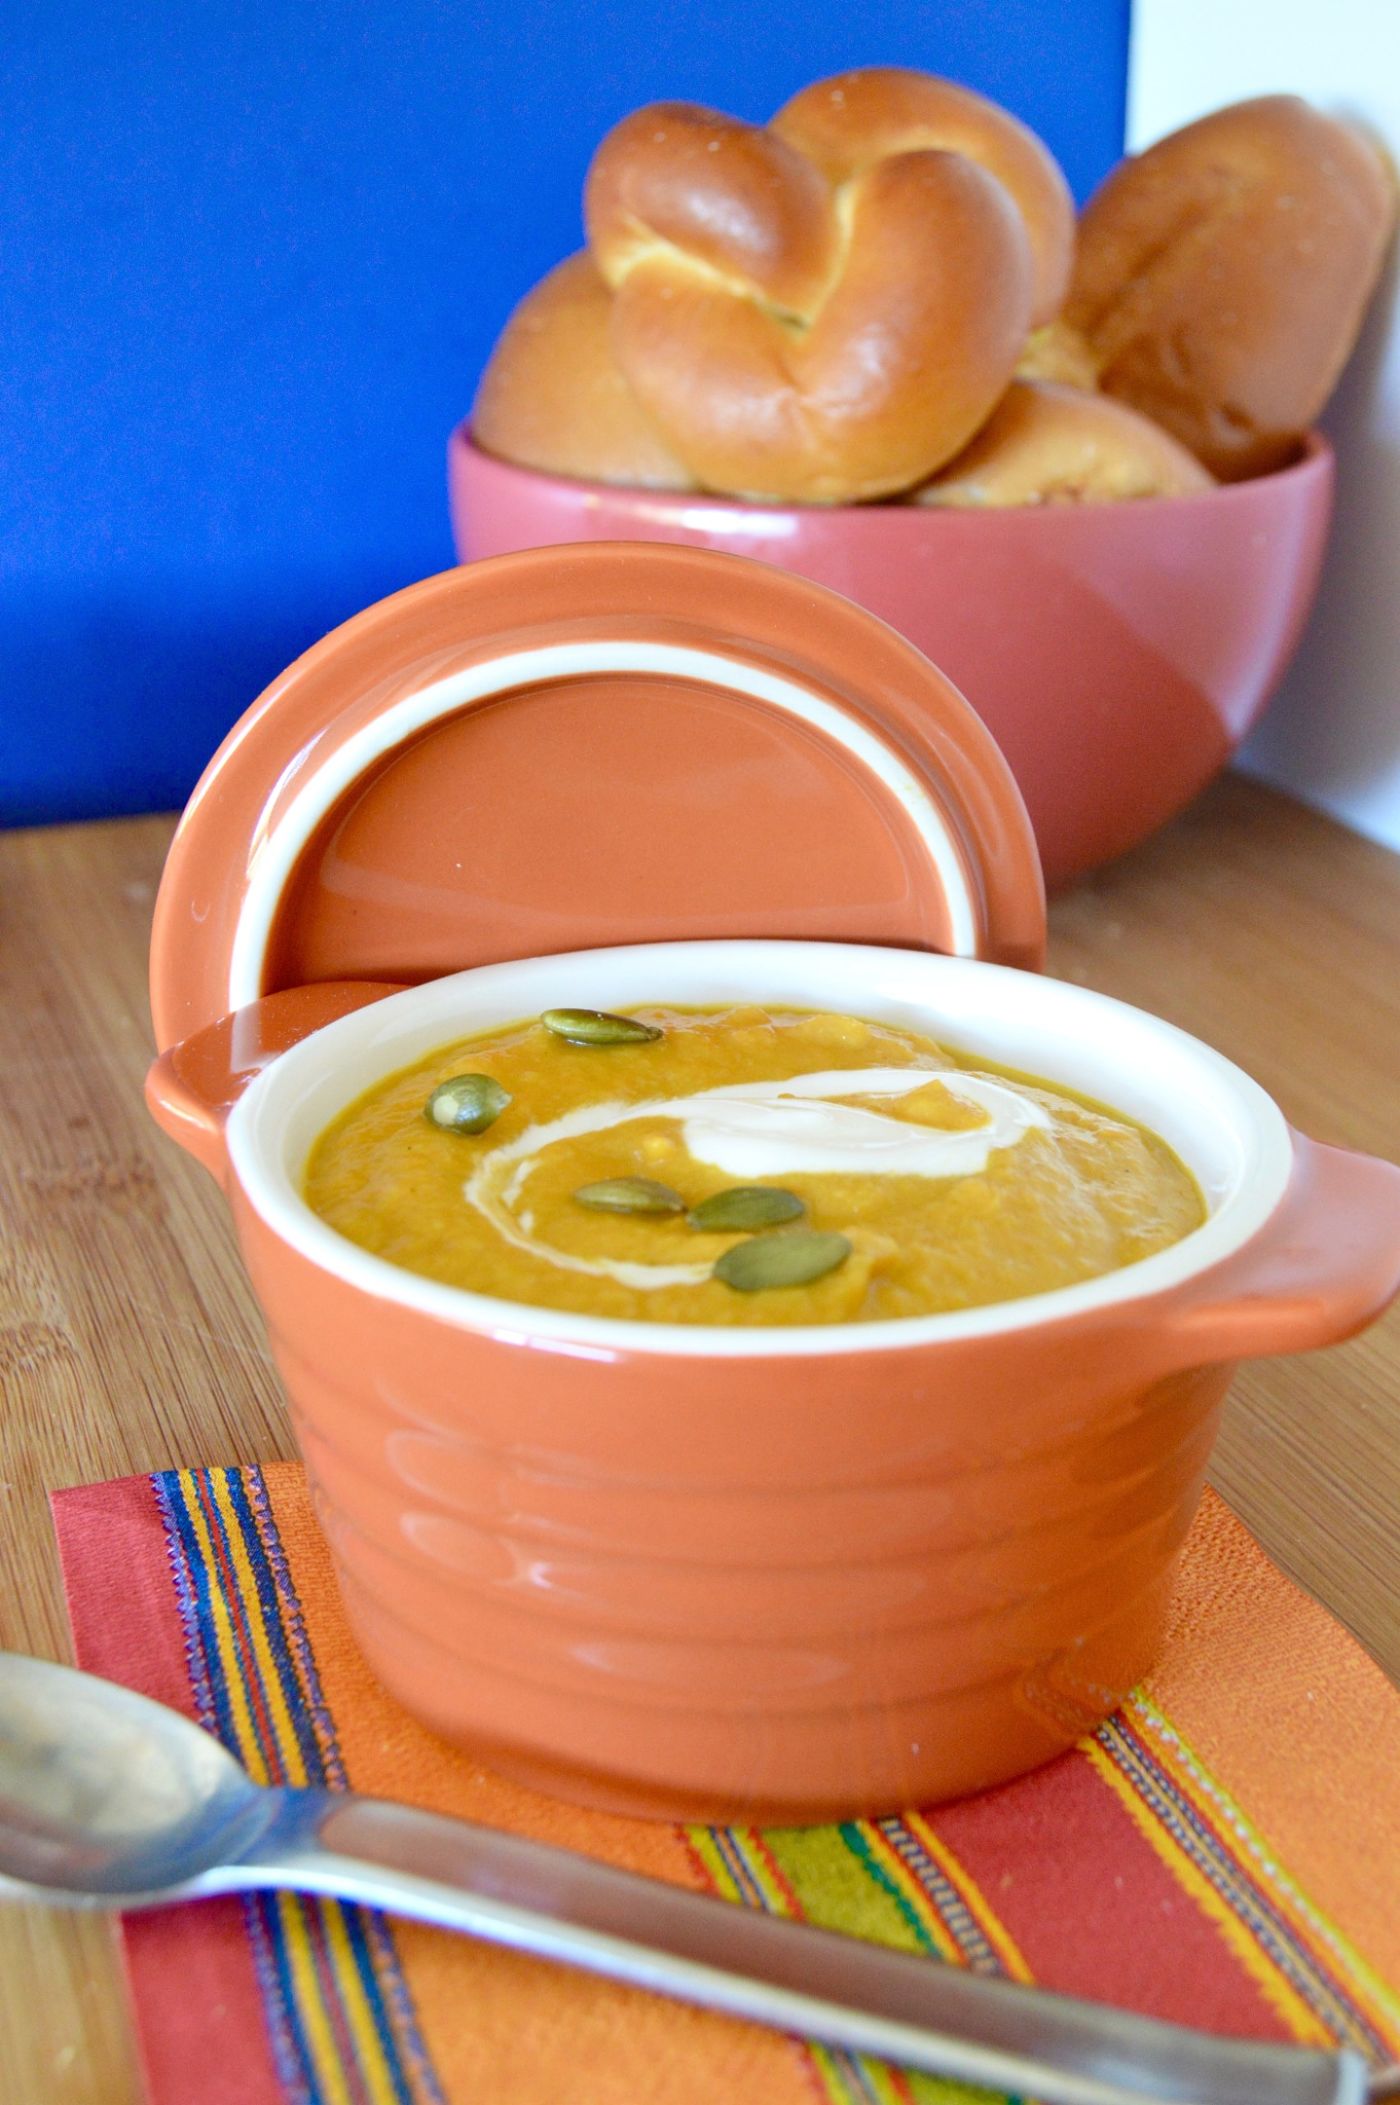 A tweak on a traditional soup, this Ginger Sweet Potato Carrot Soup hits on all flavor senses. A little bit tropical with the Ginger and Coconut Milk, but ALL comfort with the sweet potatoes and carrots. Perfect soup to make ahead and bring to a potluck, work meeting or to serve lunch with a friend at home!